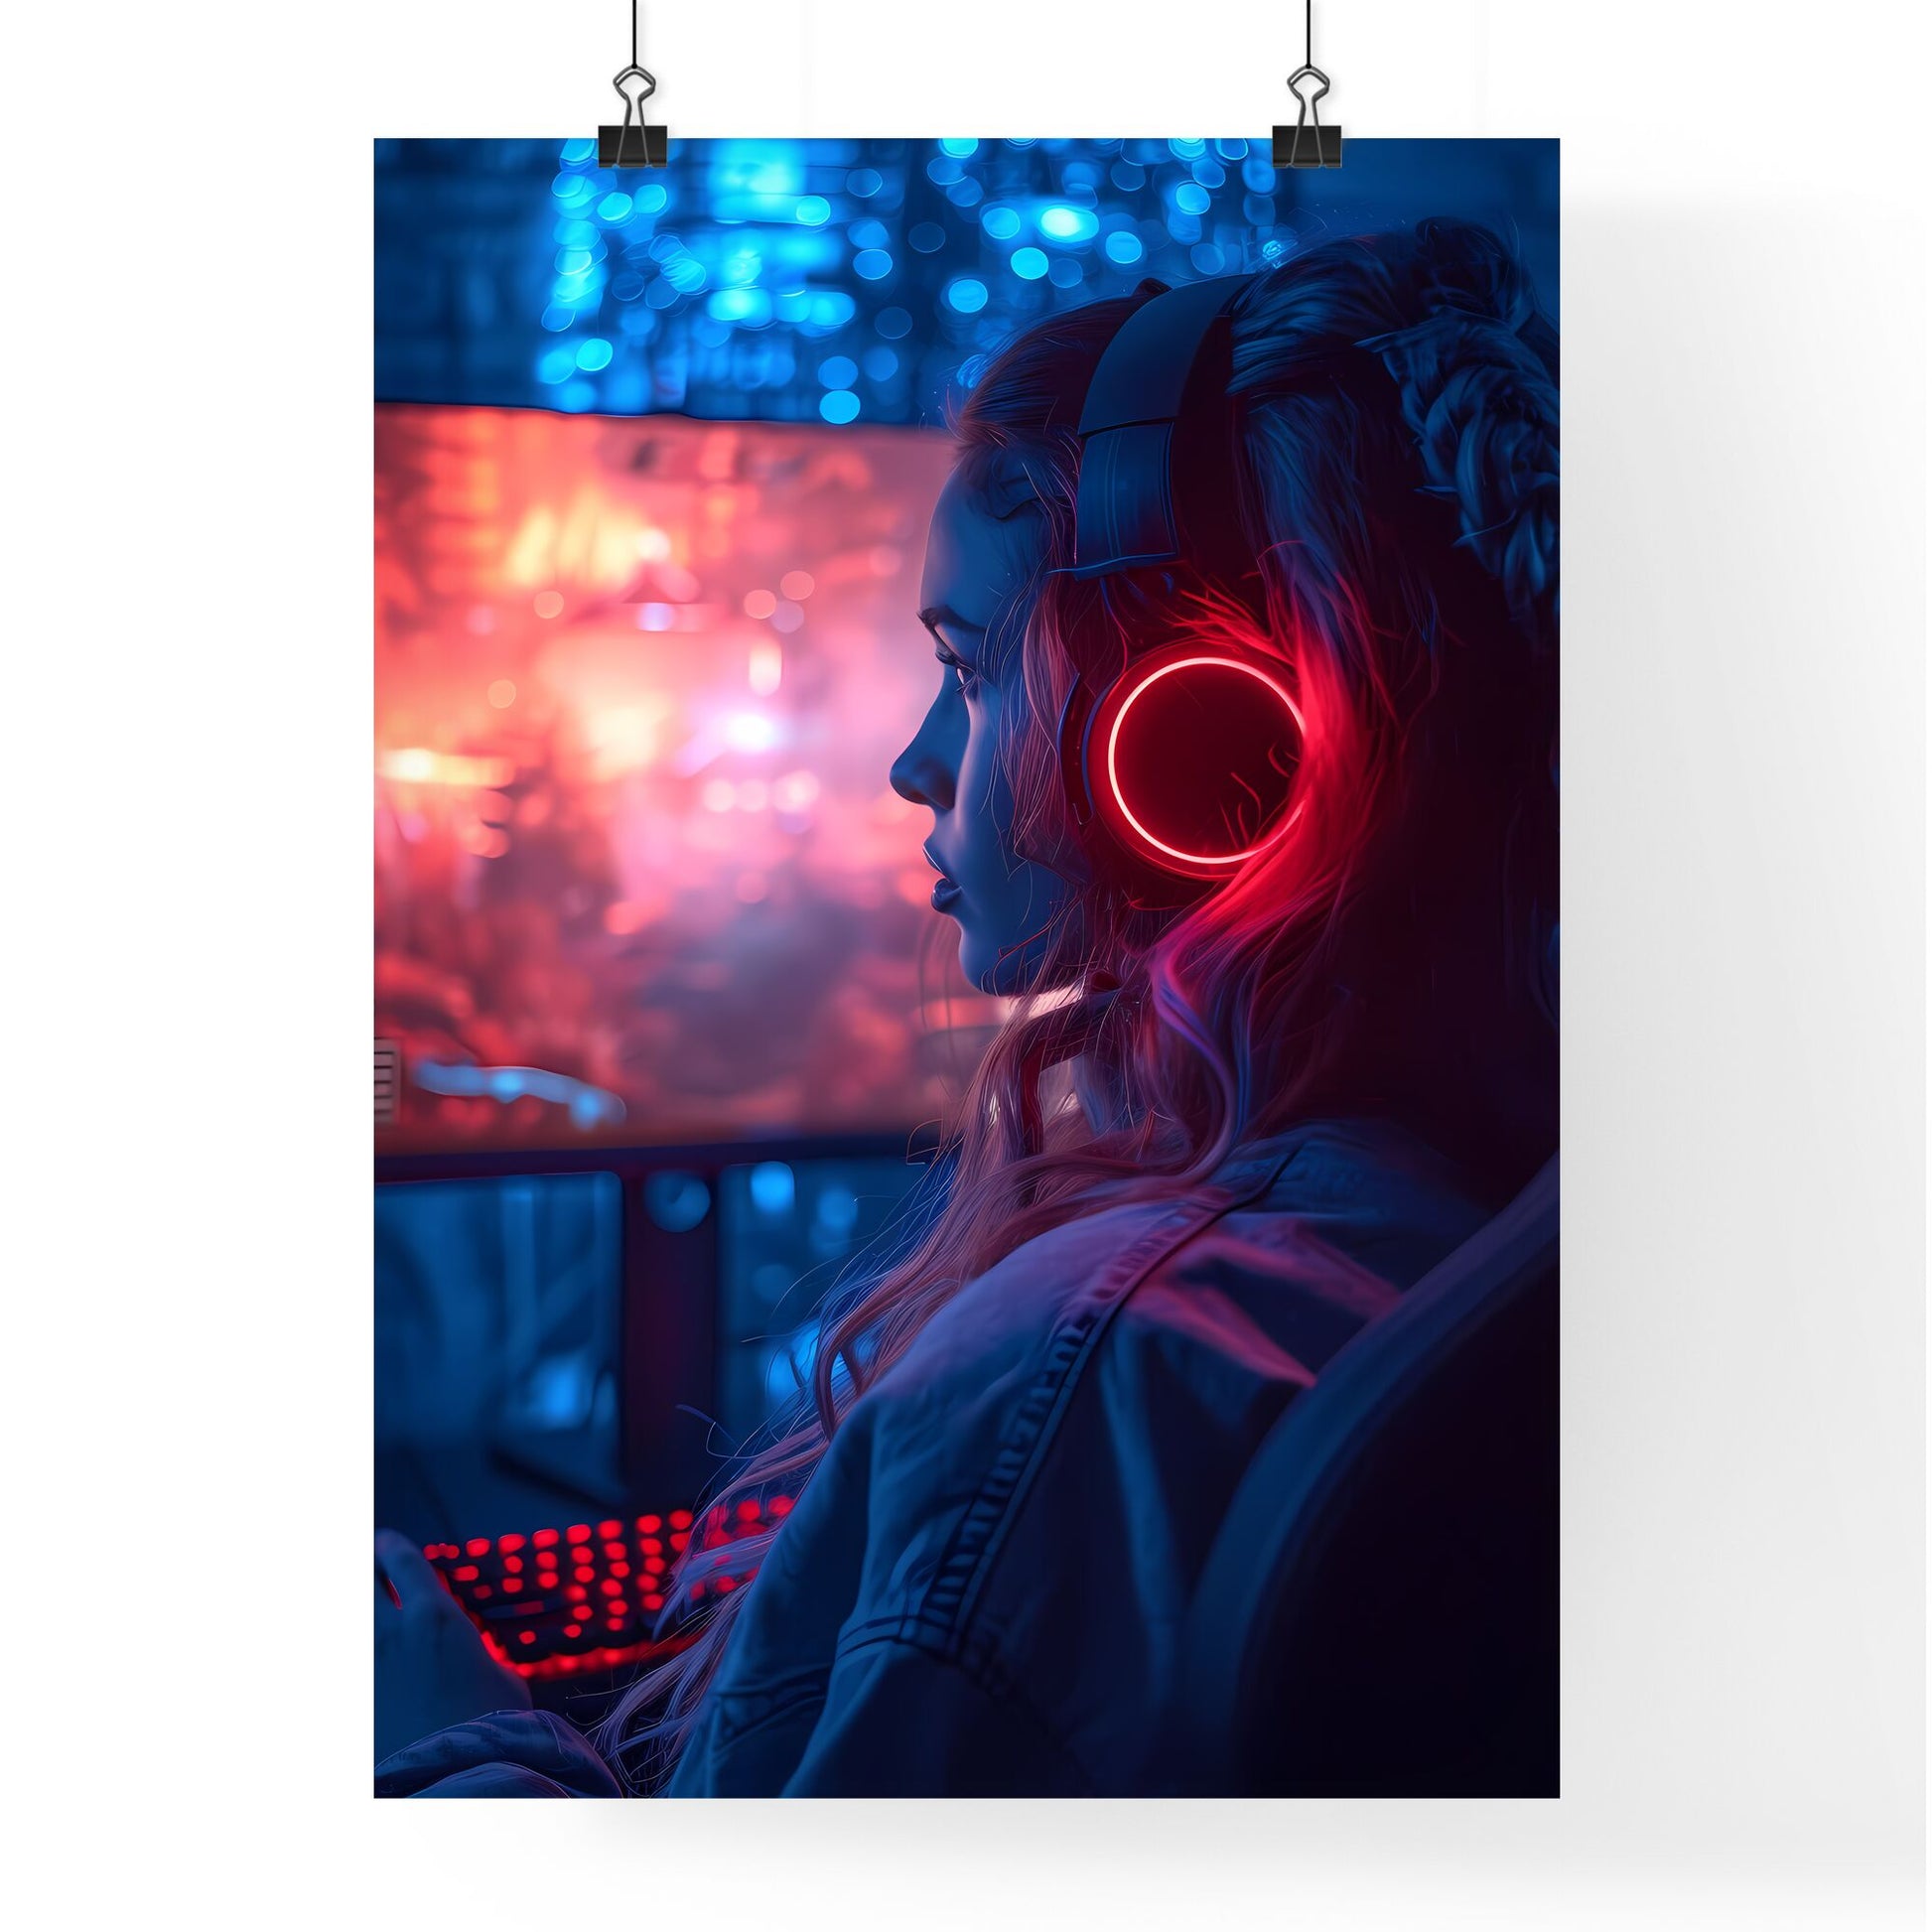 A trendy gamer streams herself - Art print of a woman wearing headphones and looking at a computer screen Default Title